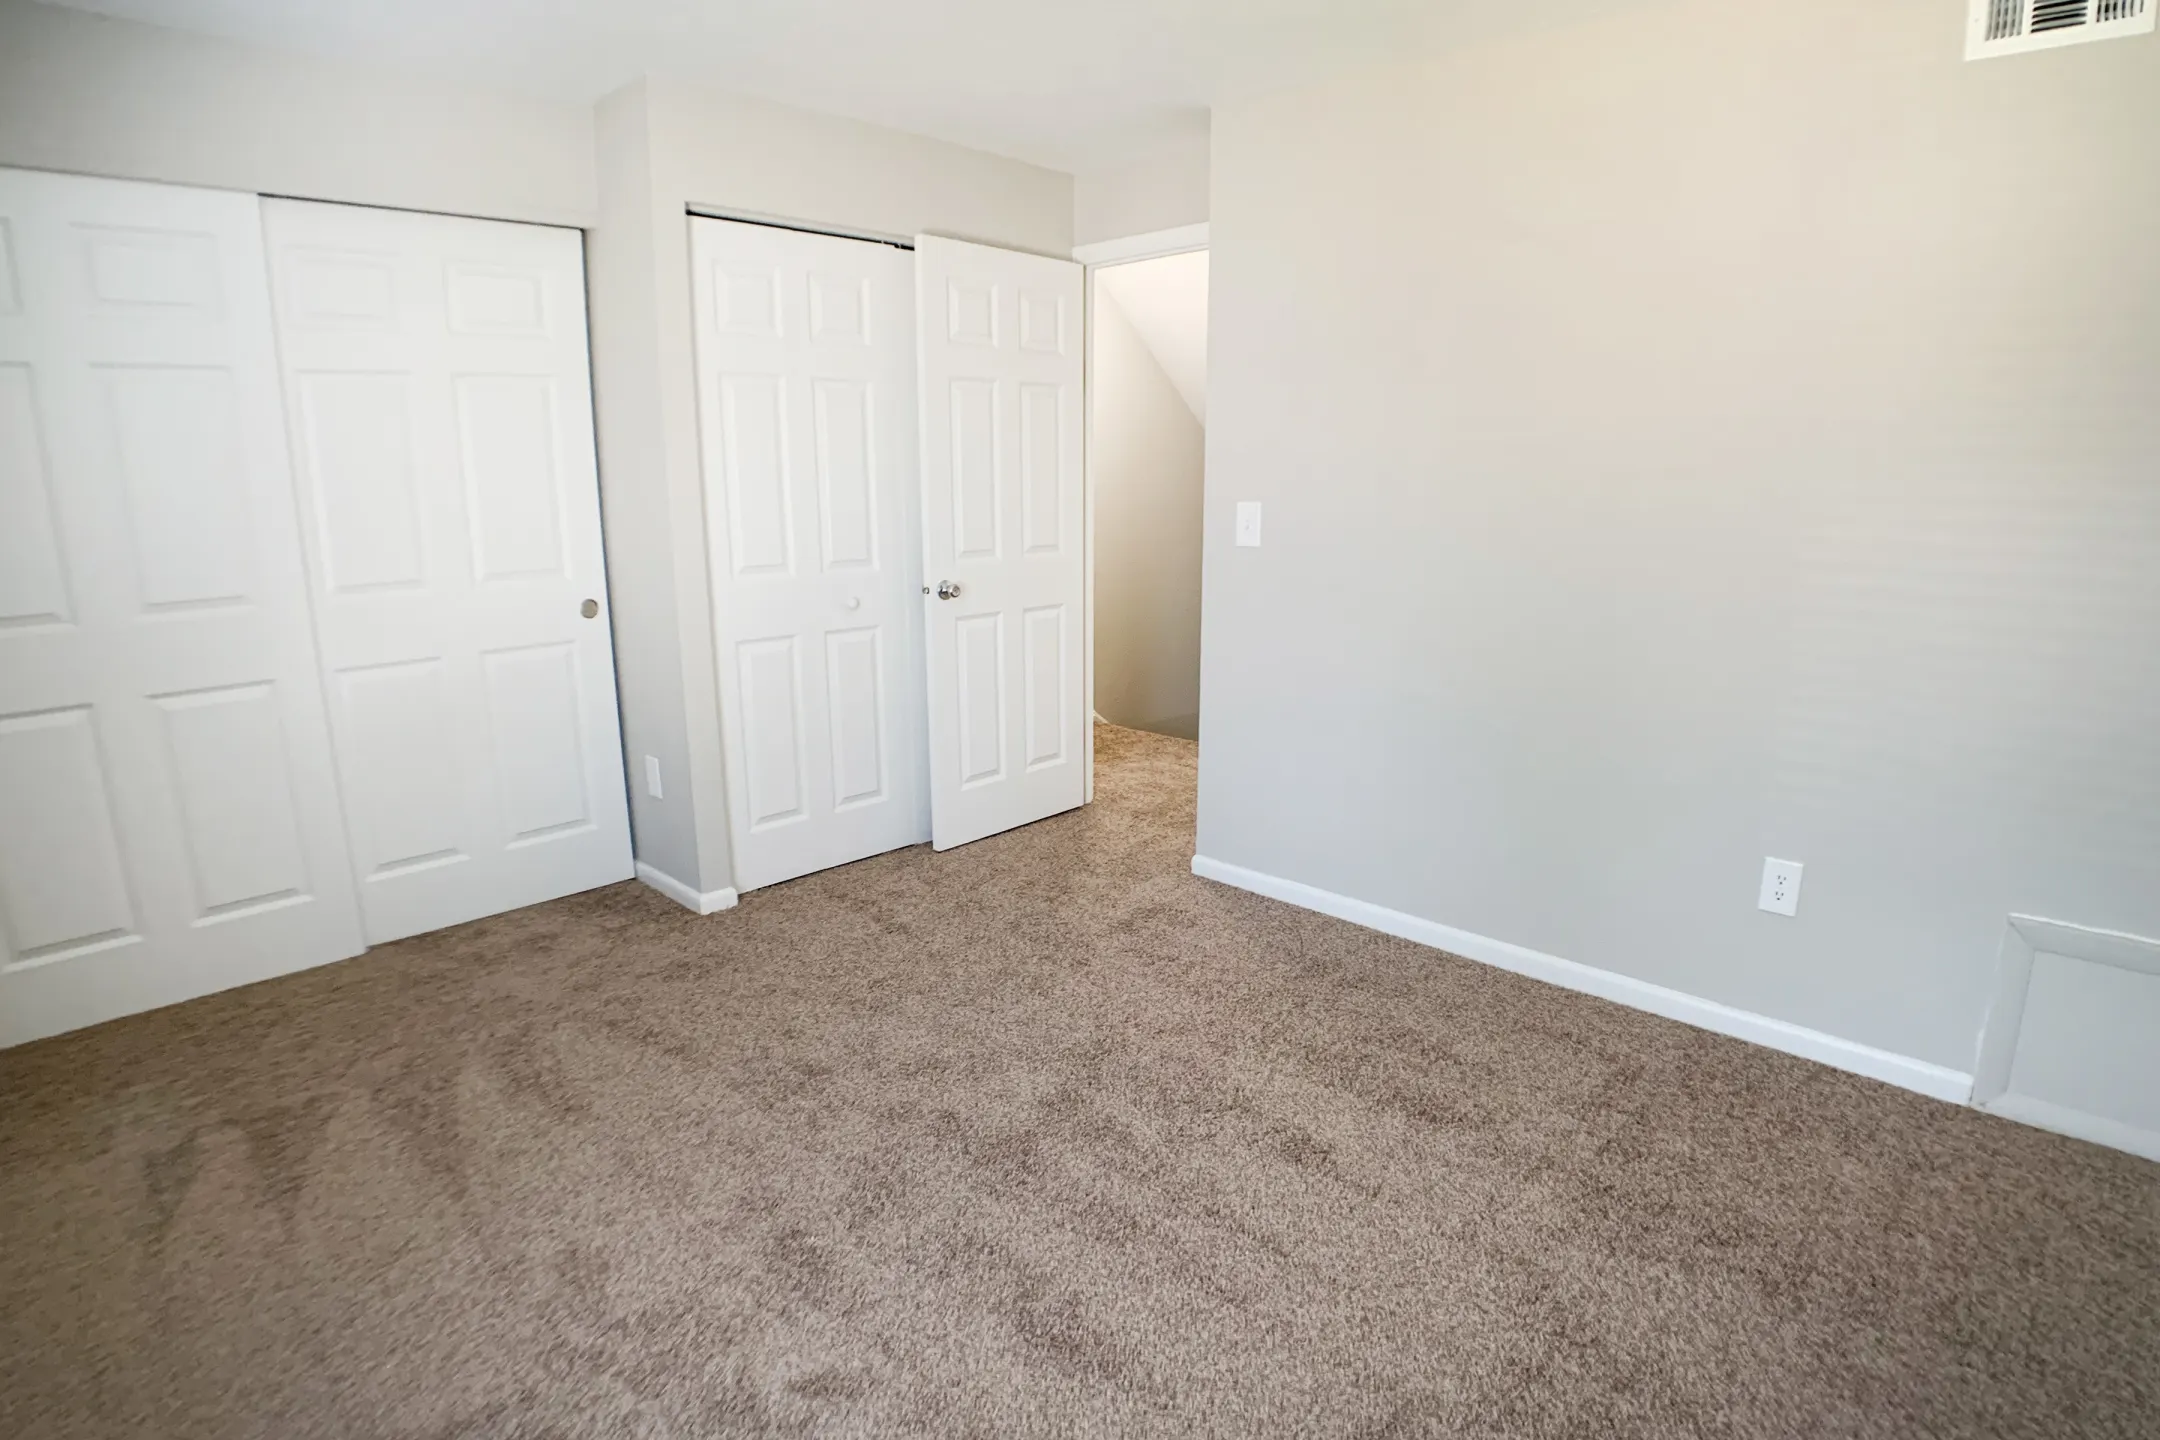 Bedroom - Miamisburg By The Mall - Miamisburg, OH